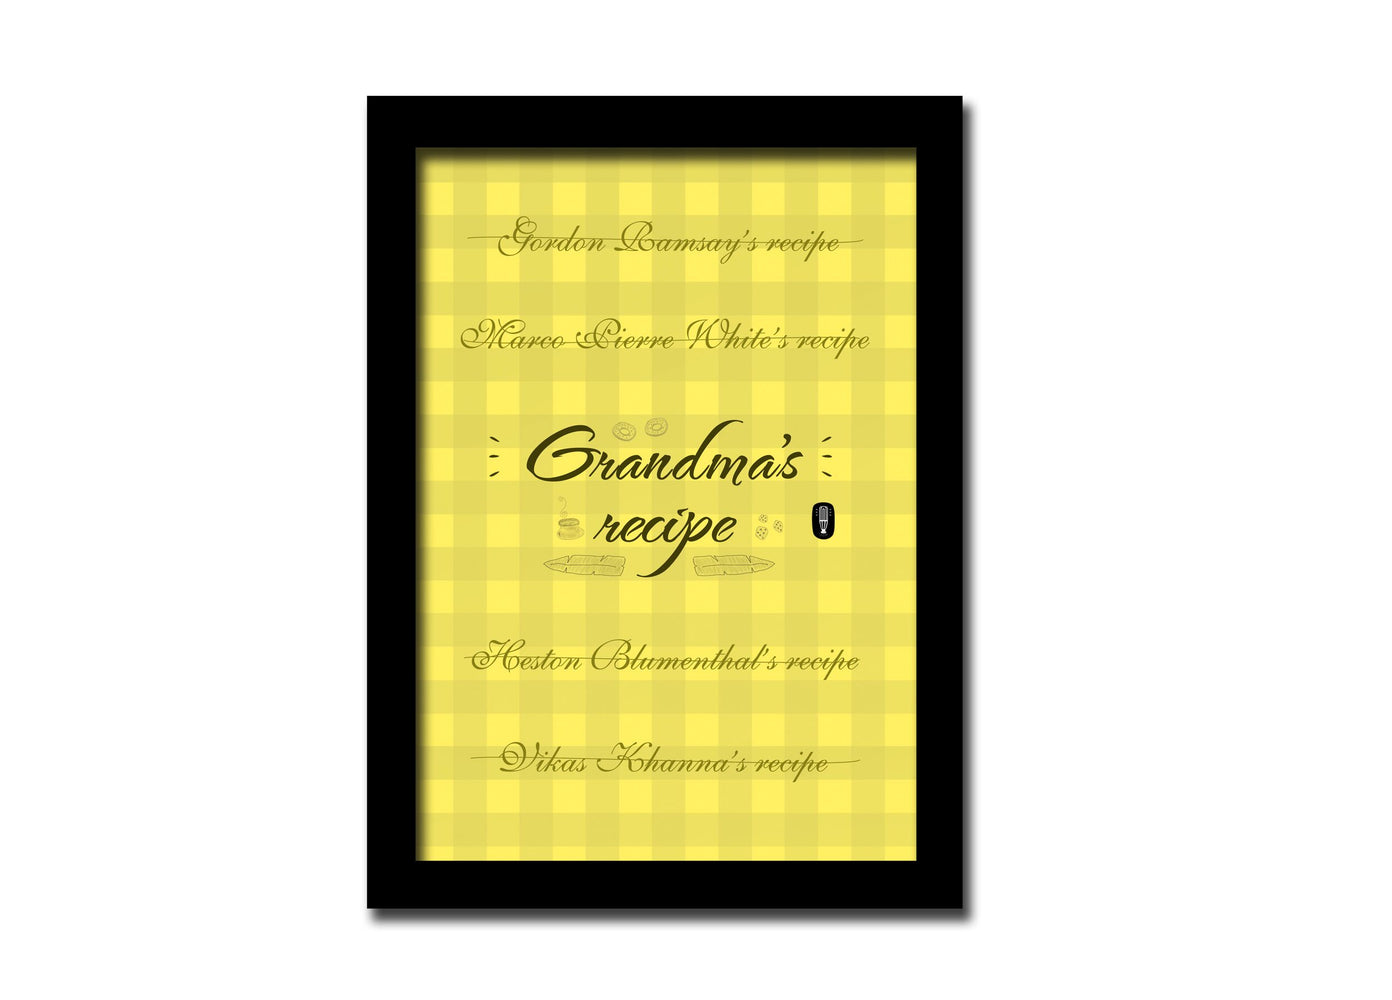 Grandma's recipe | A5 size Frame | For desk and Wall